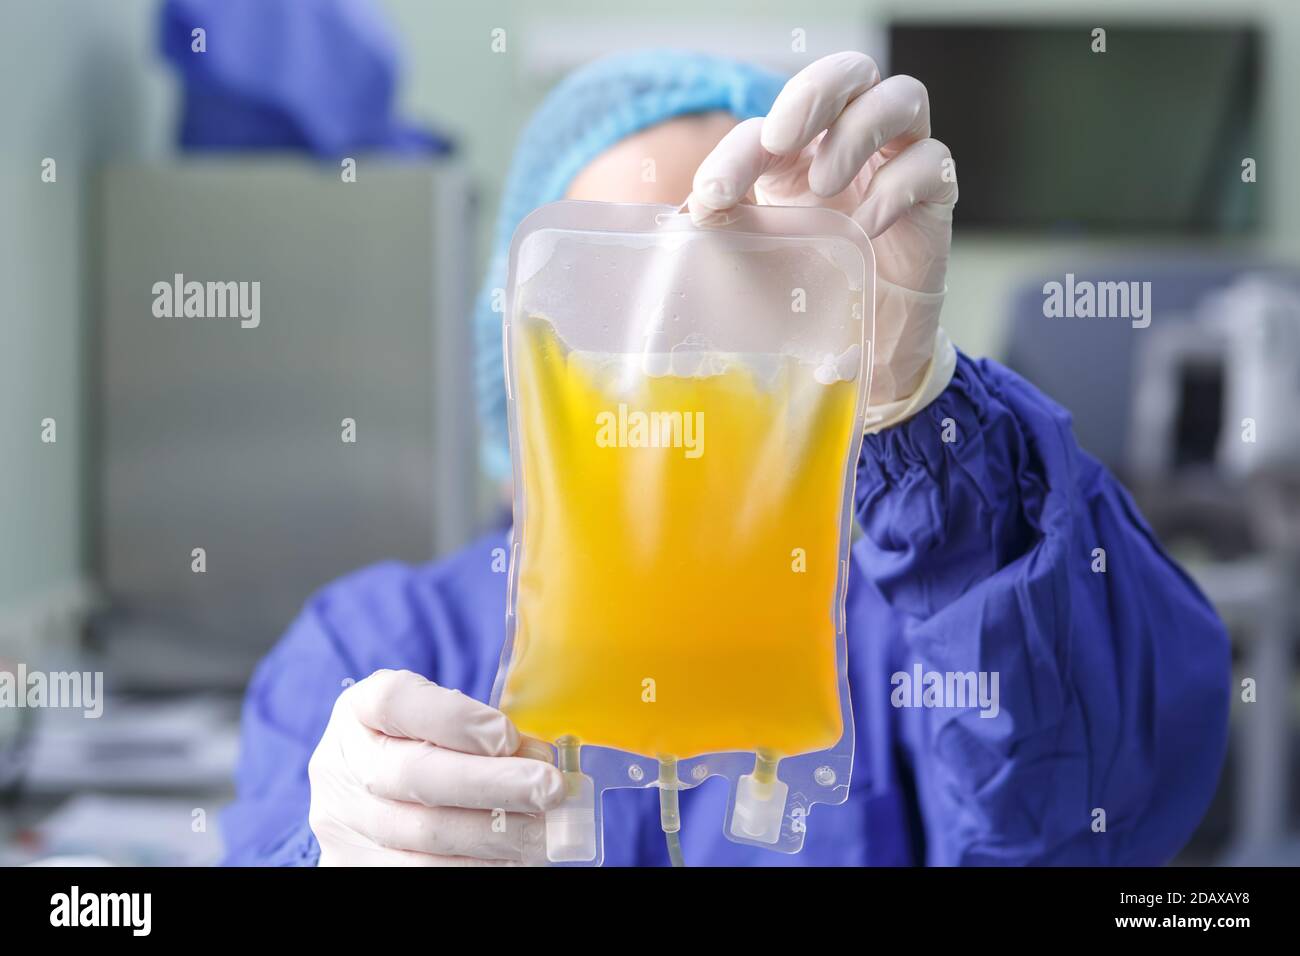 Gloved hands of a medical worker holding a bag of blood plasma close-up Stock Photo